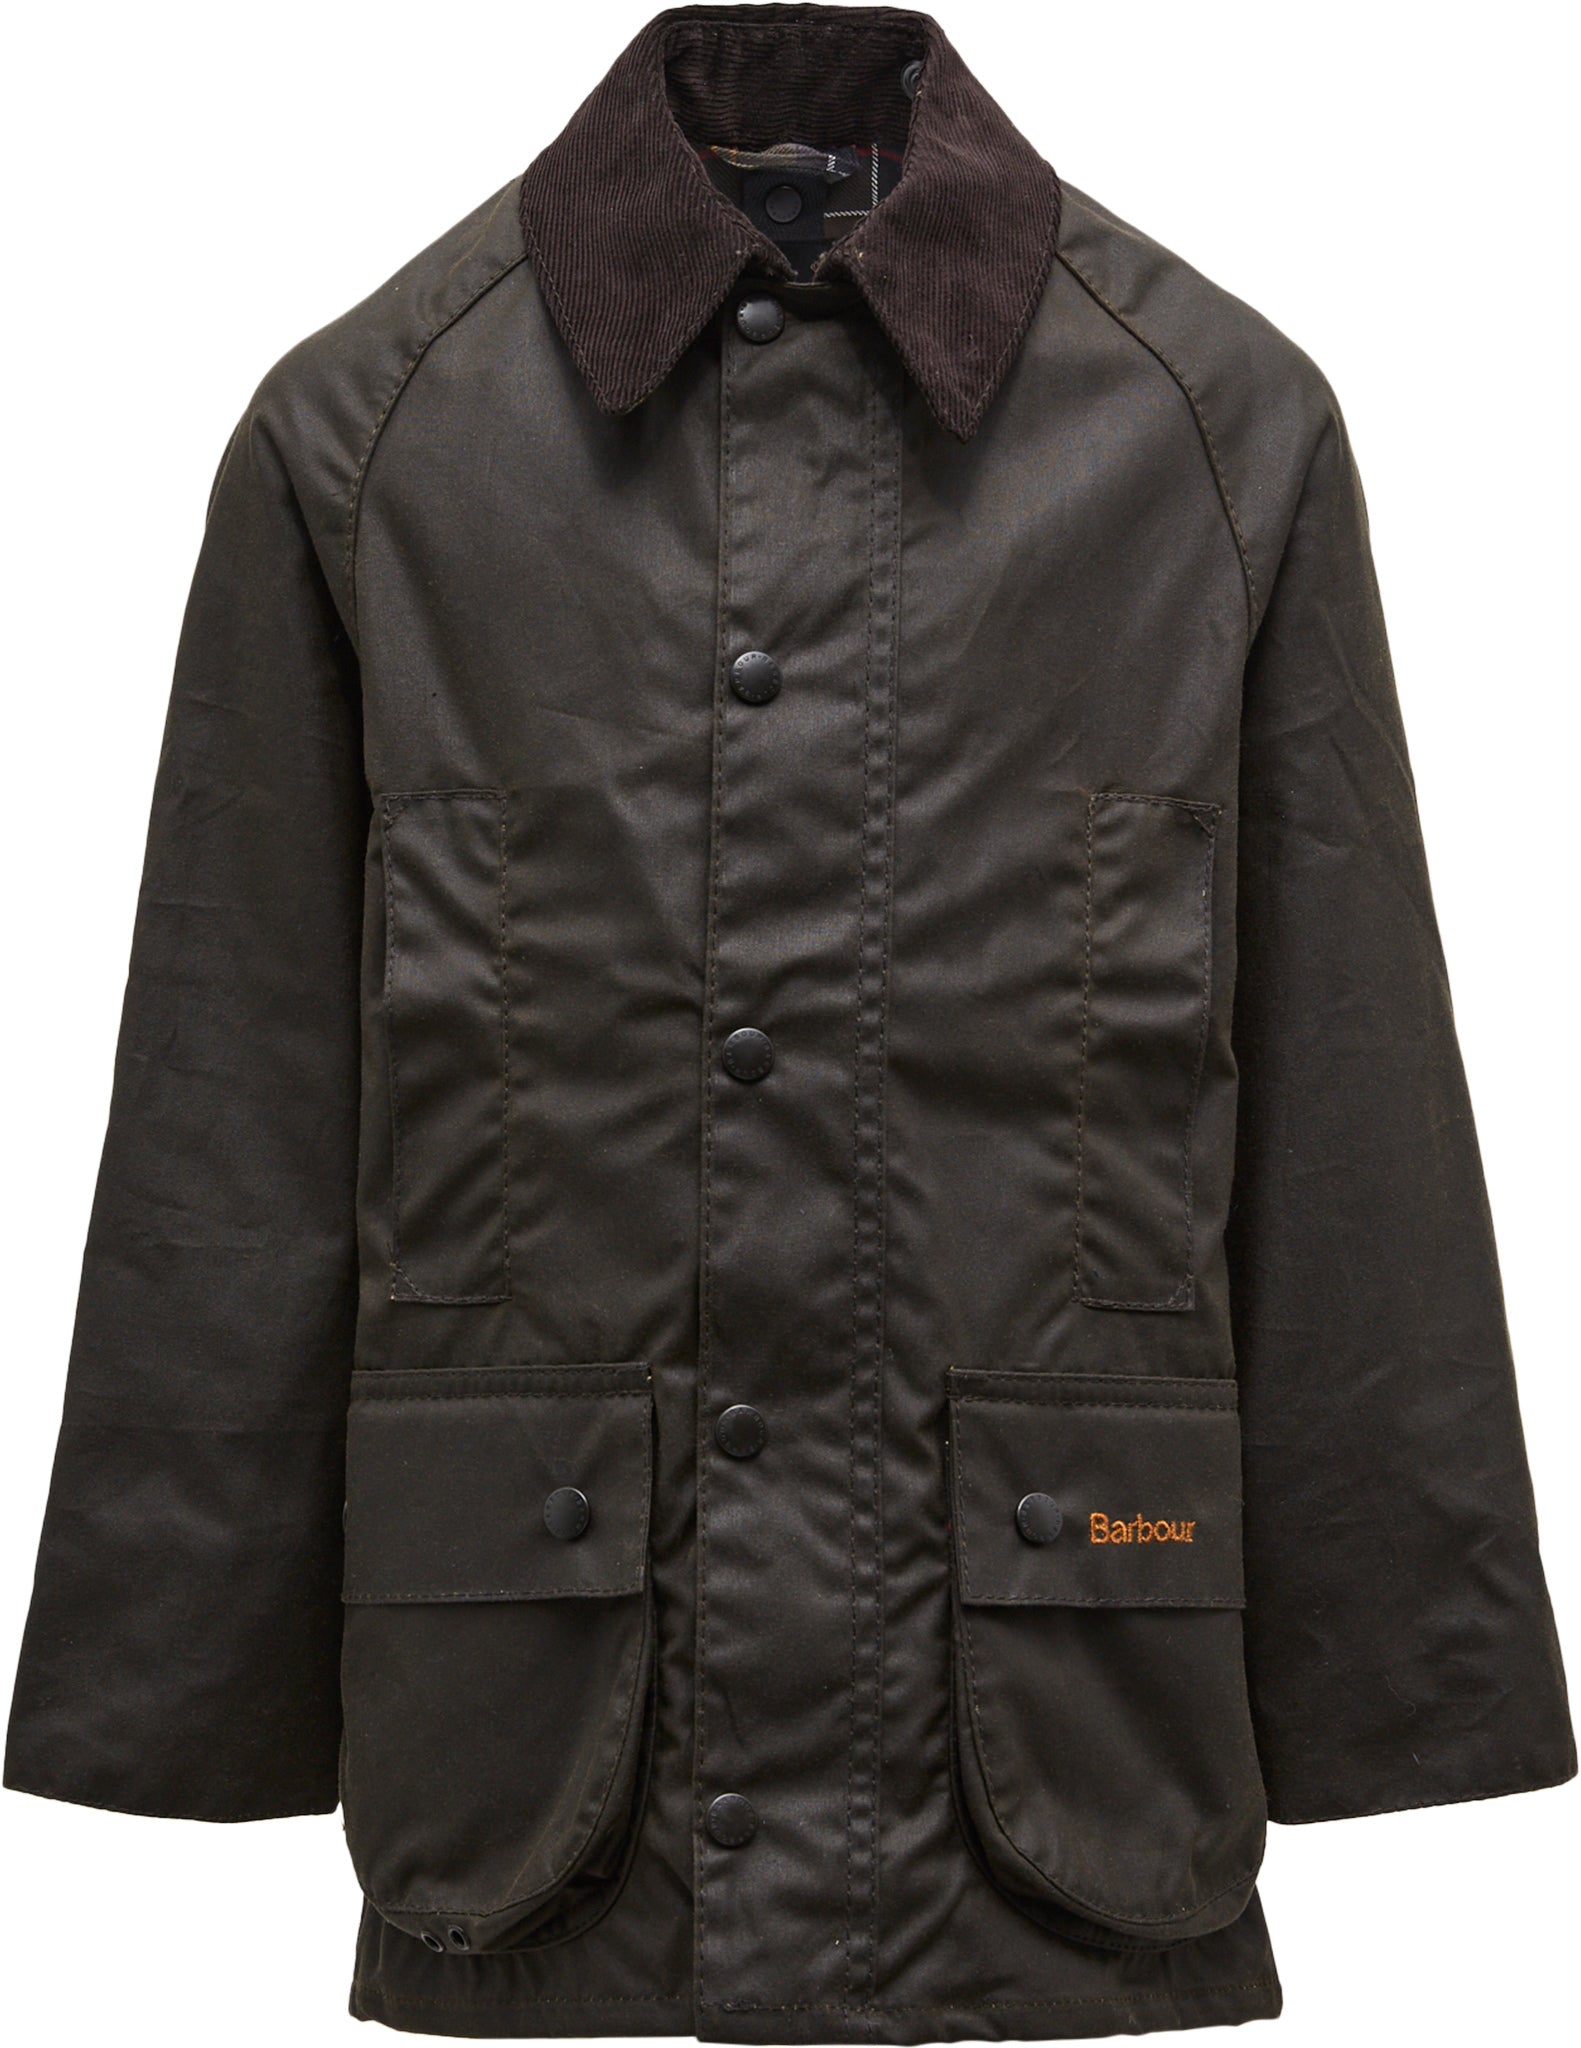 Shop Barbour jackets in Canada | Altitude Sports